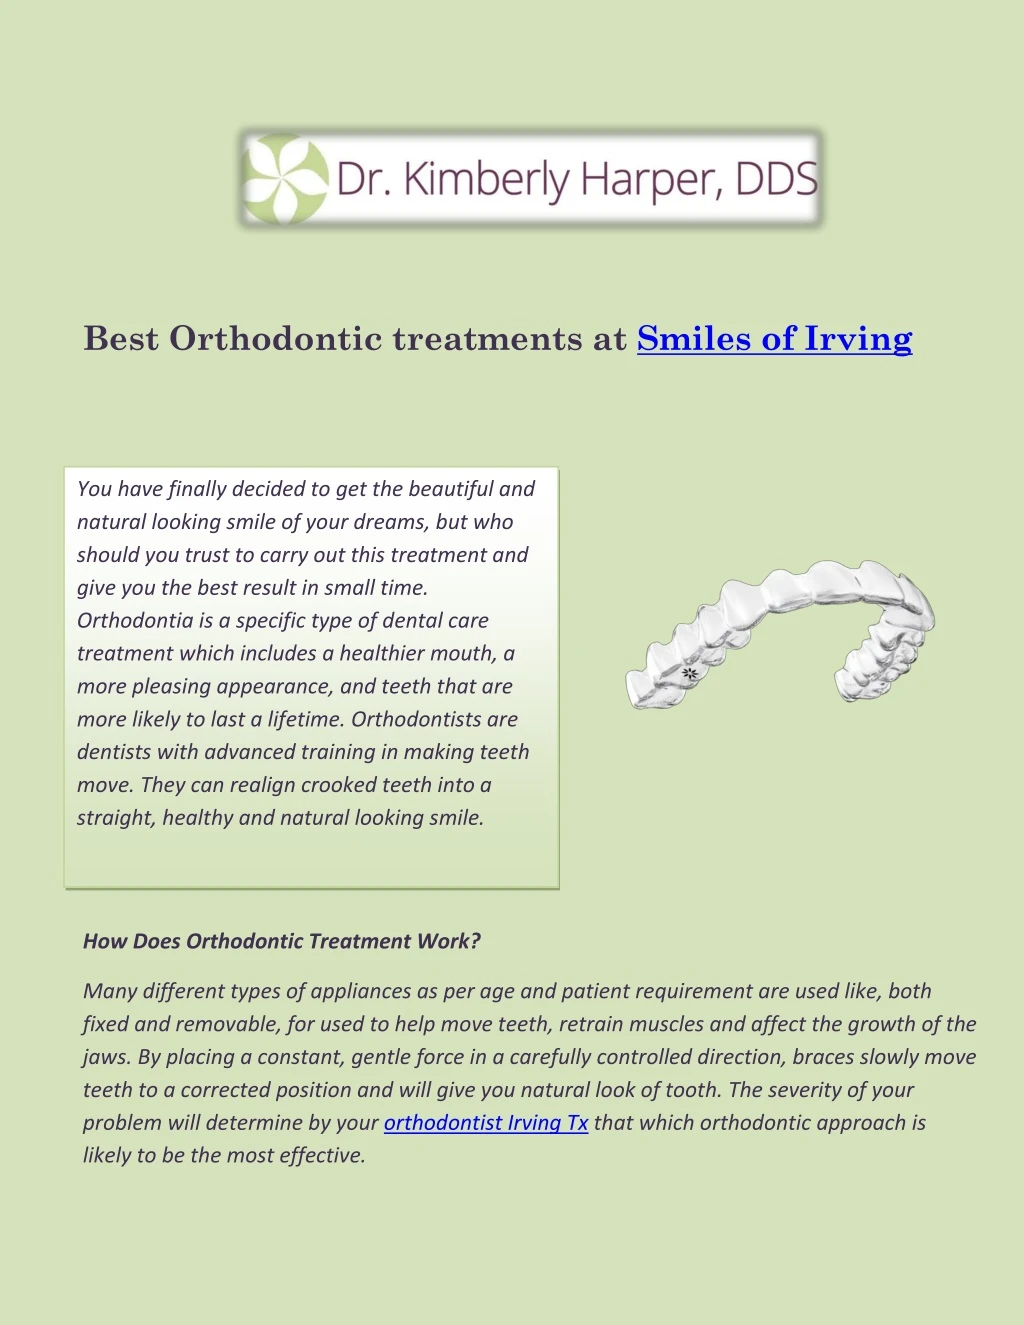 best orthodontic treatments at smiles of irving